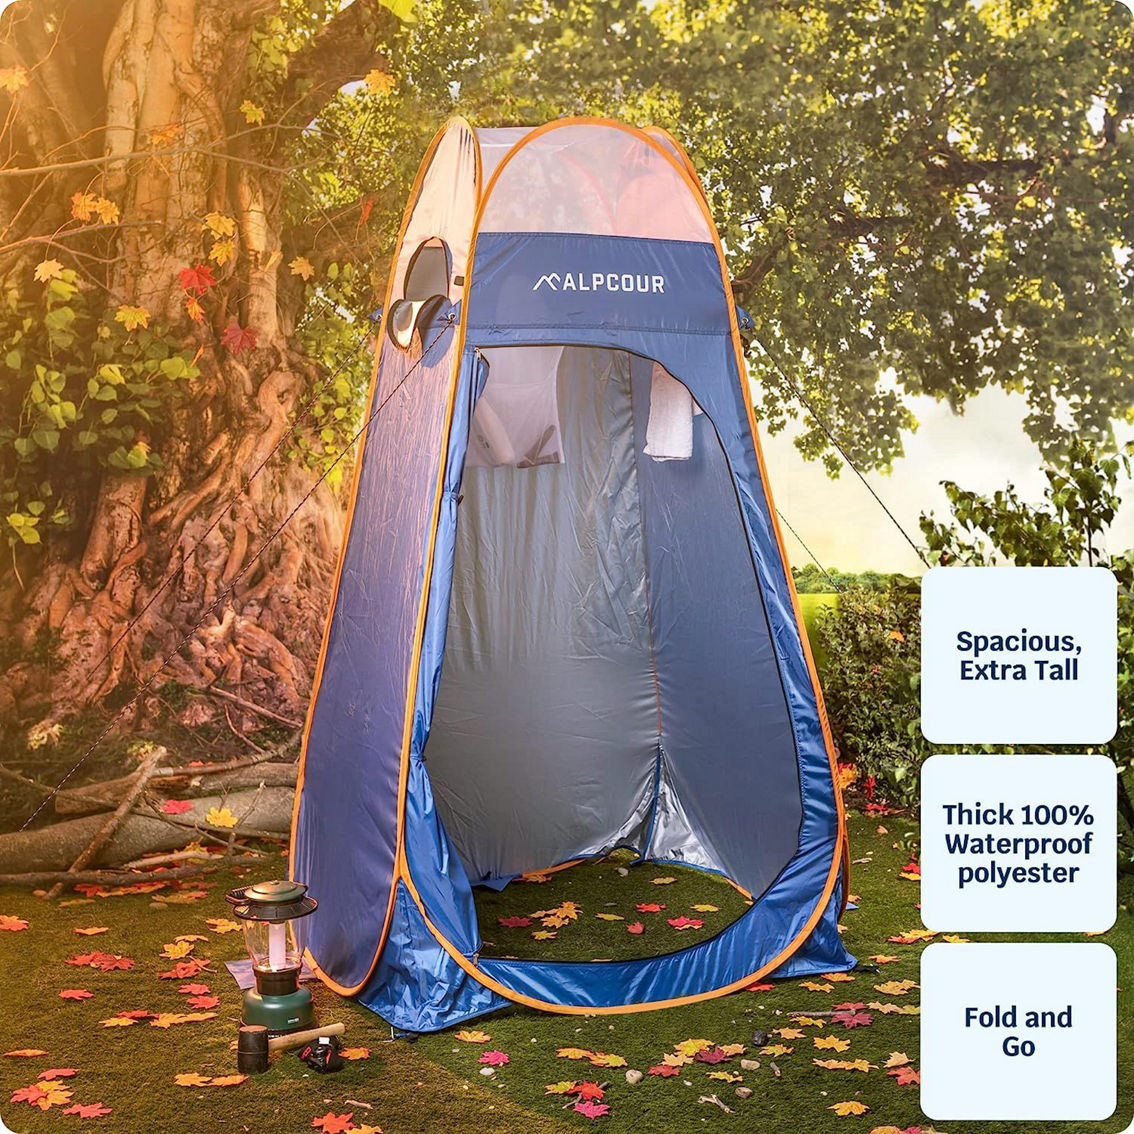 Alpcour Privacy Pop-Up Tent - Portable Spacious & Waterproof for Camping - Image 2 of 5